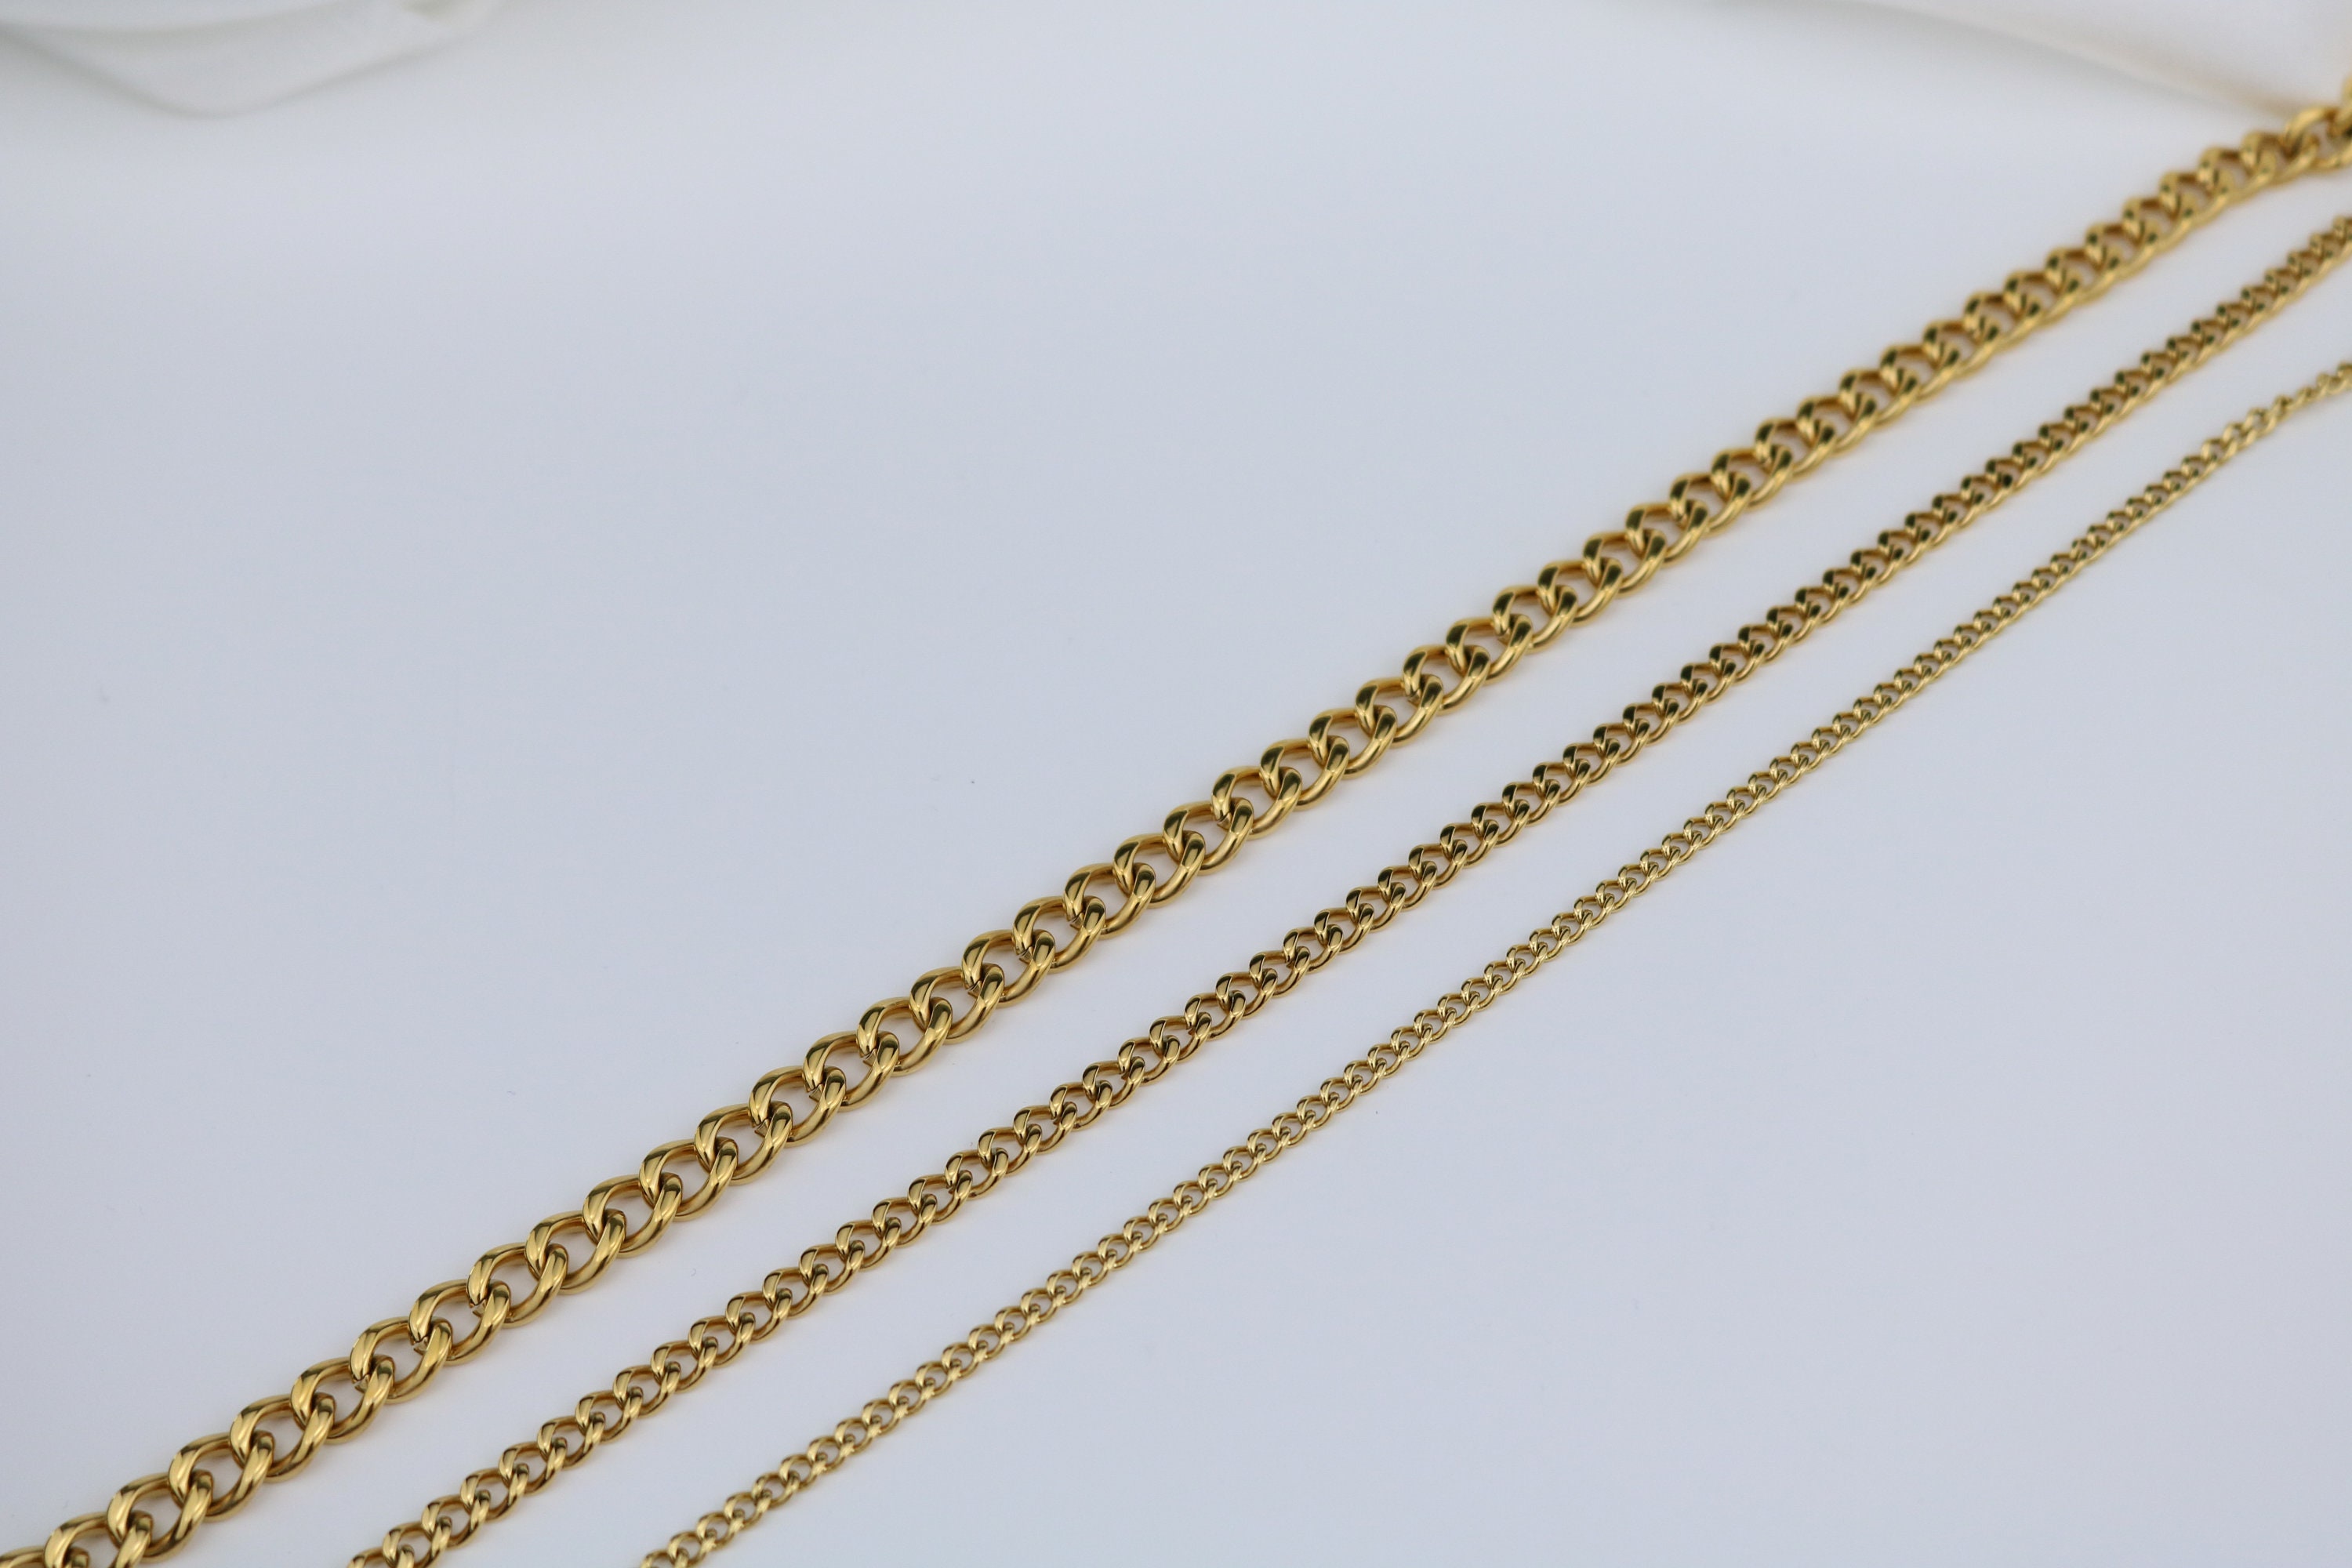 Clearance Pricing BLOWOUT 18K Gold Filled Designed Chain Necklace